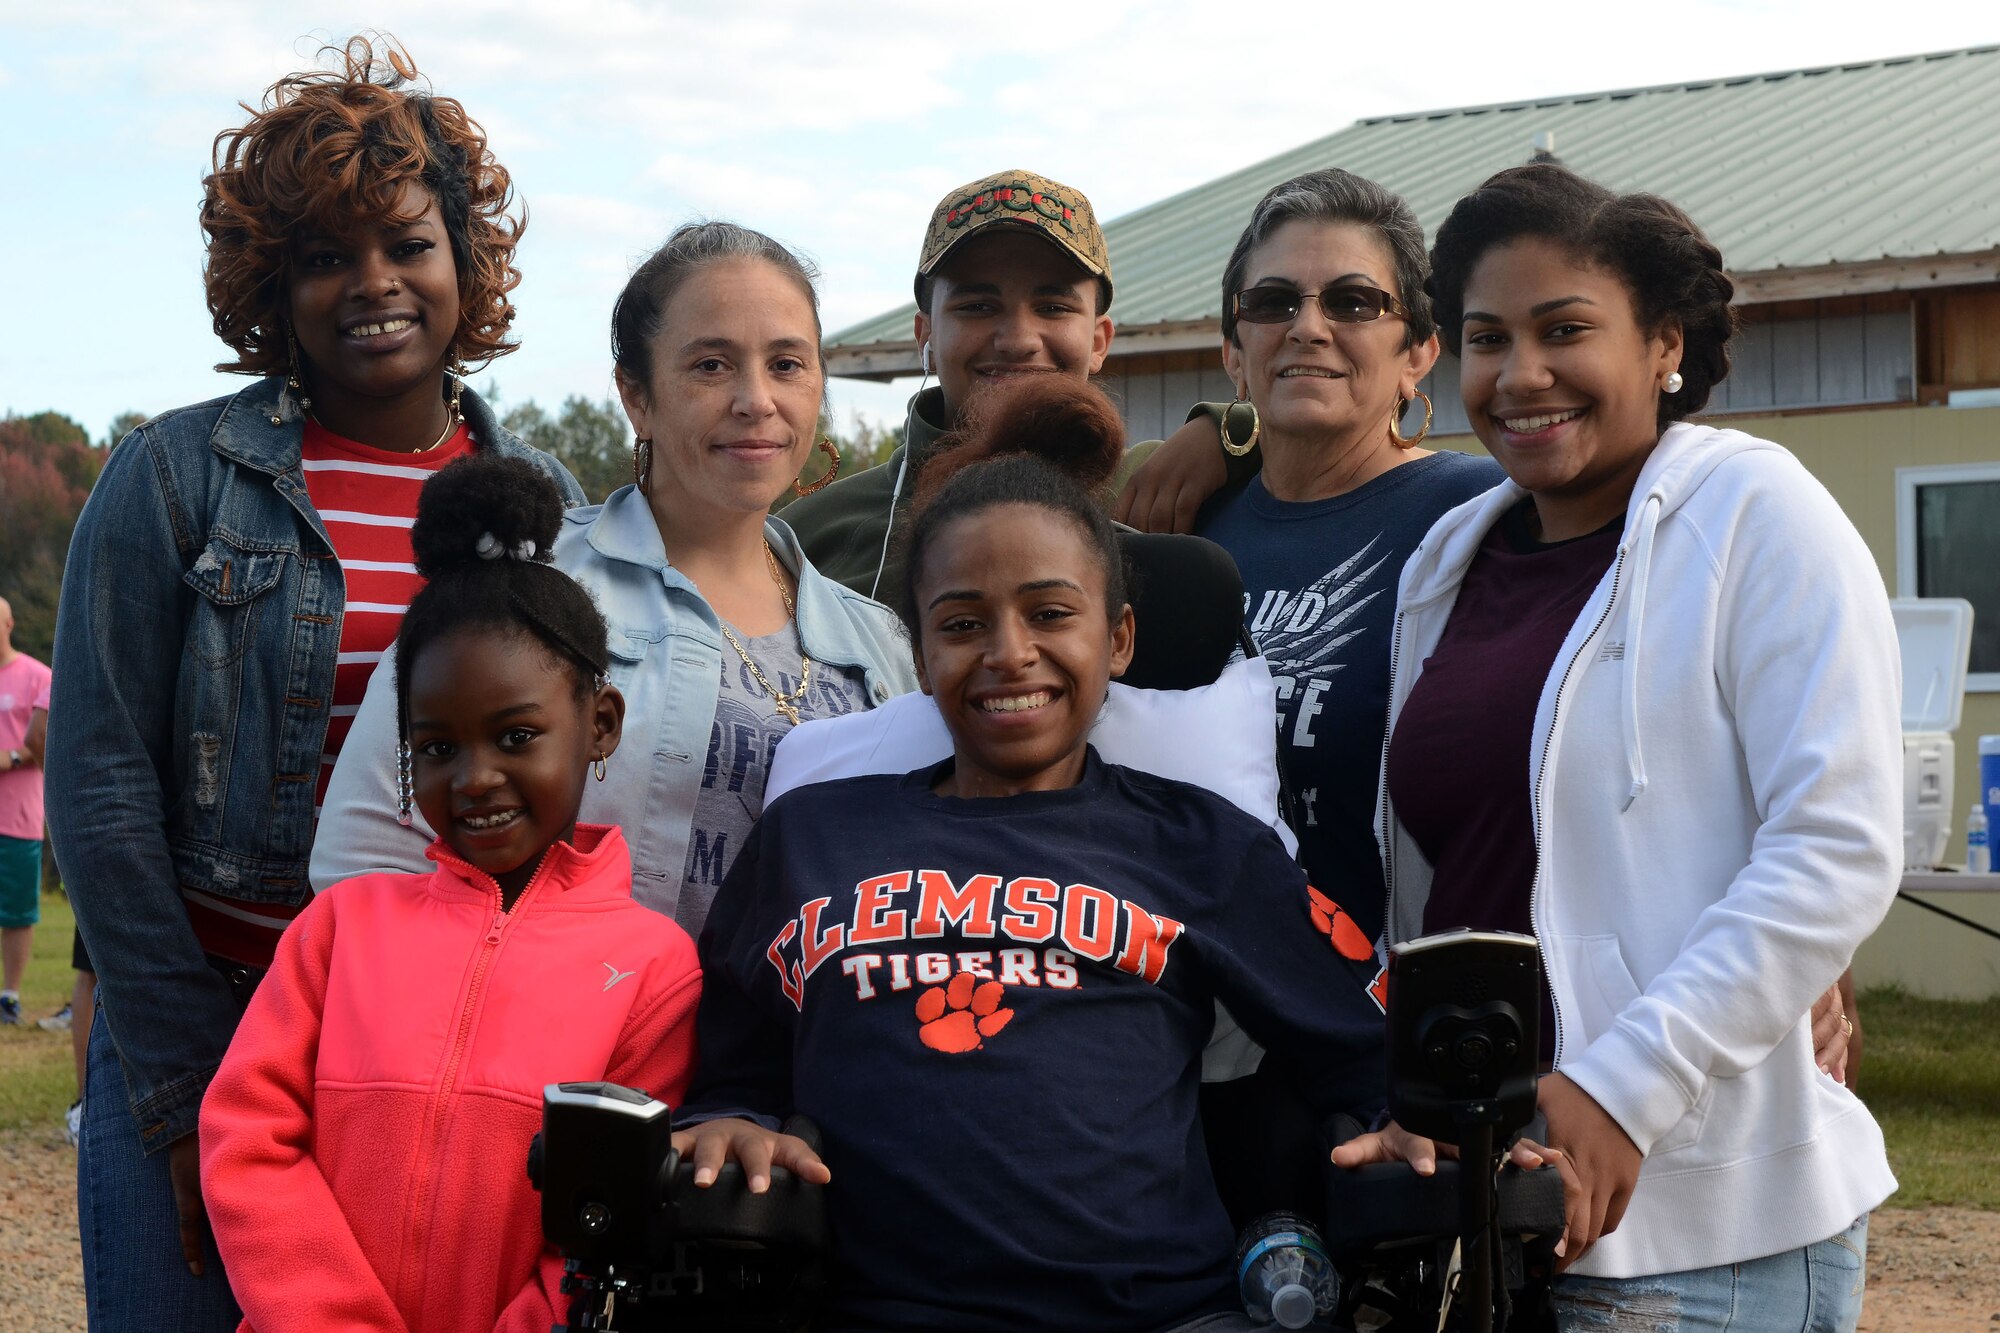 U.S. Air Force Airman 1st Class Jamia Porcher, an aircraft electrician assigned to the 169th Maintenance Squadron, and family at the 6th annual Foxtrot Warrior Run at McEntire Joint National Guard Base, S.C., Oct. 16, 2016.  The fundraiser event raised money for the Warm Heart Association to benefit Porcher, an aircraft electrician assigned to the 169th Maintenance Squadron, and other South Carolina Wounded Warrior charities.   (U.S. Air National Guard photo by Senior Airman Ashleigh Pavelek)  